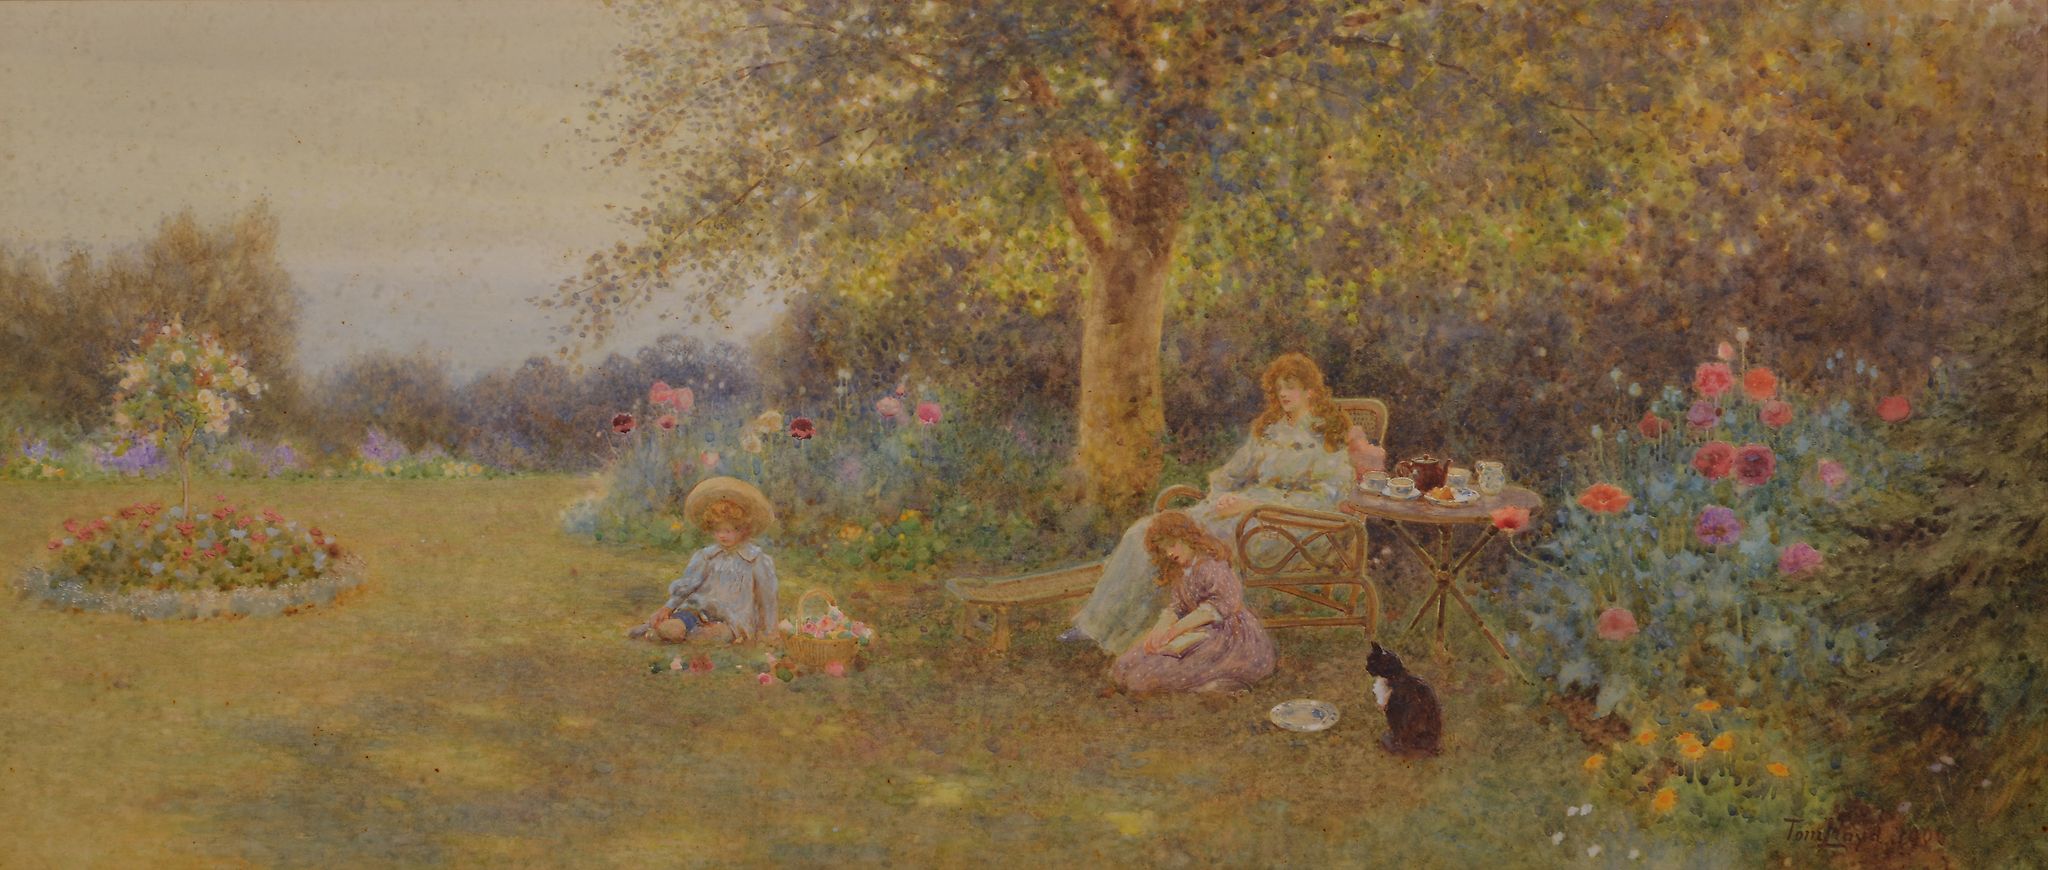 Thomas James Lloyd (British 1849-1910) - Summer Afternoon Watercolour Signed and dated 1906 lower